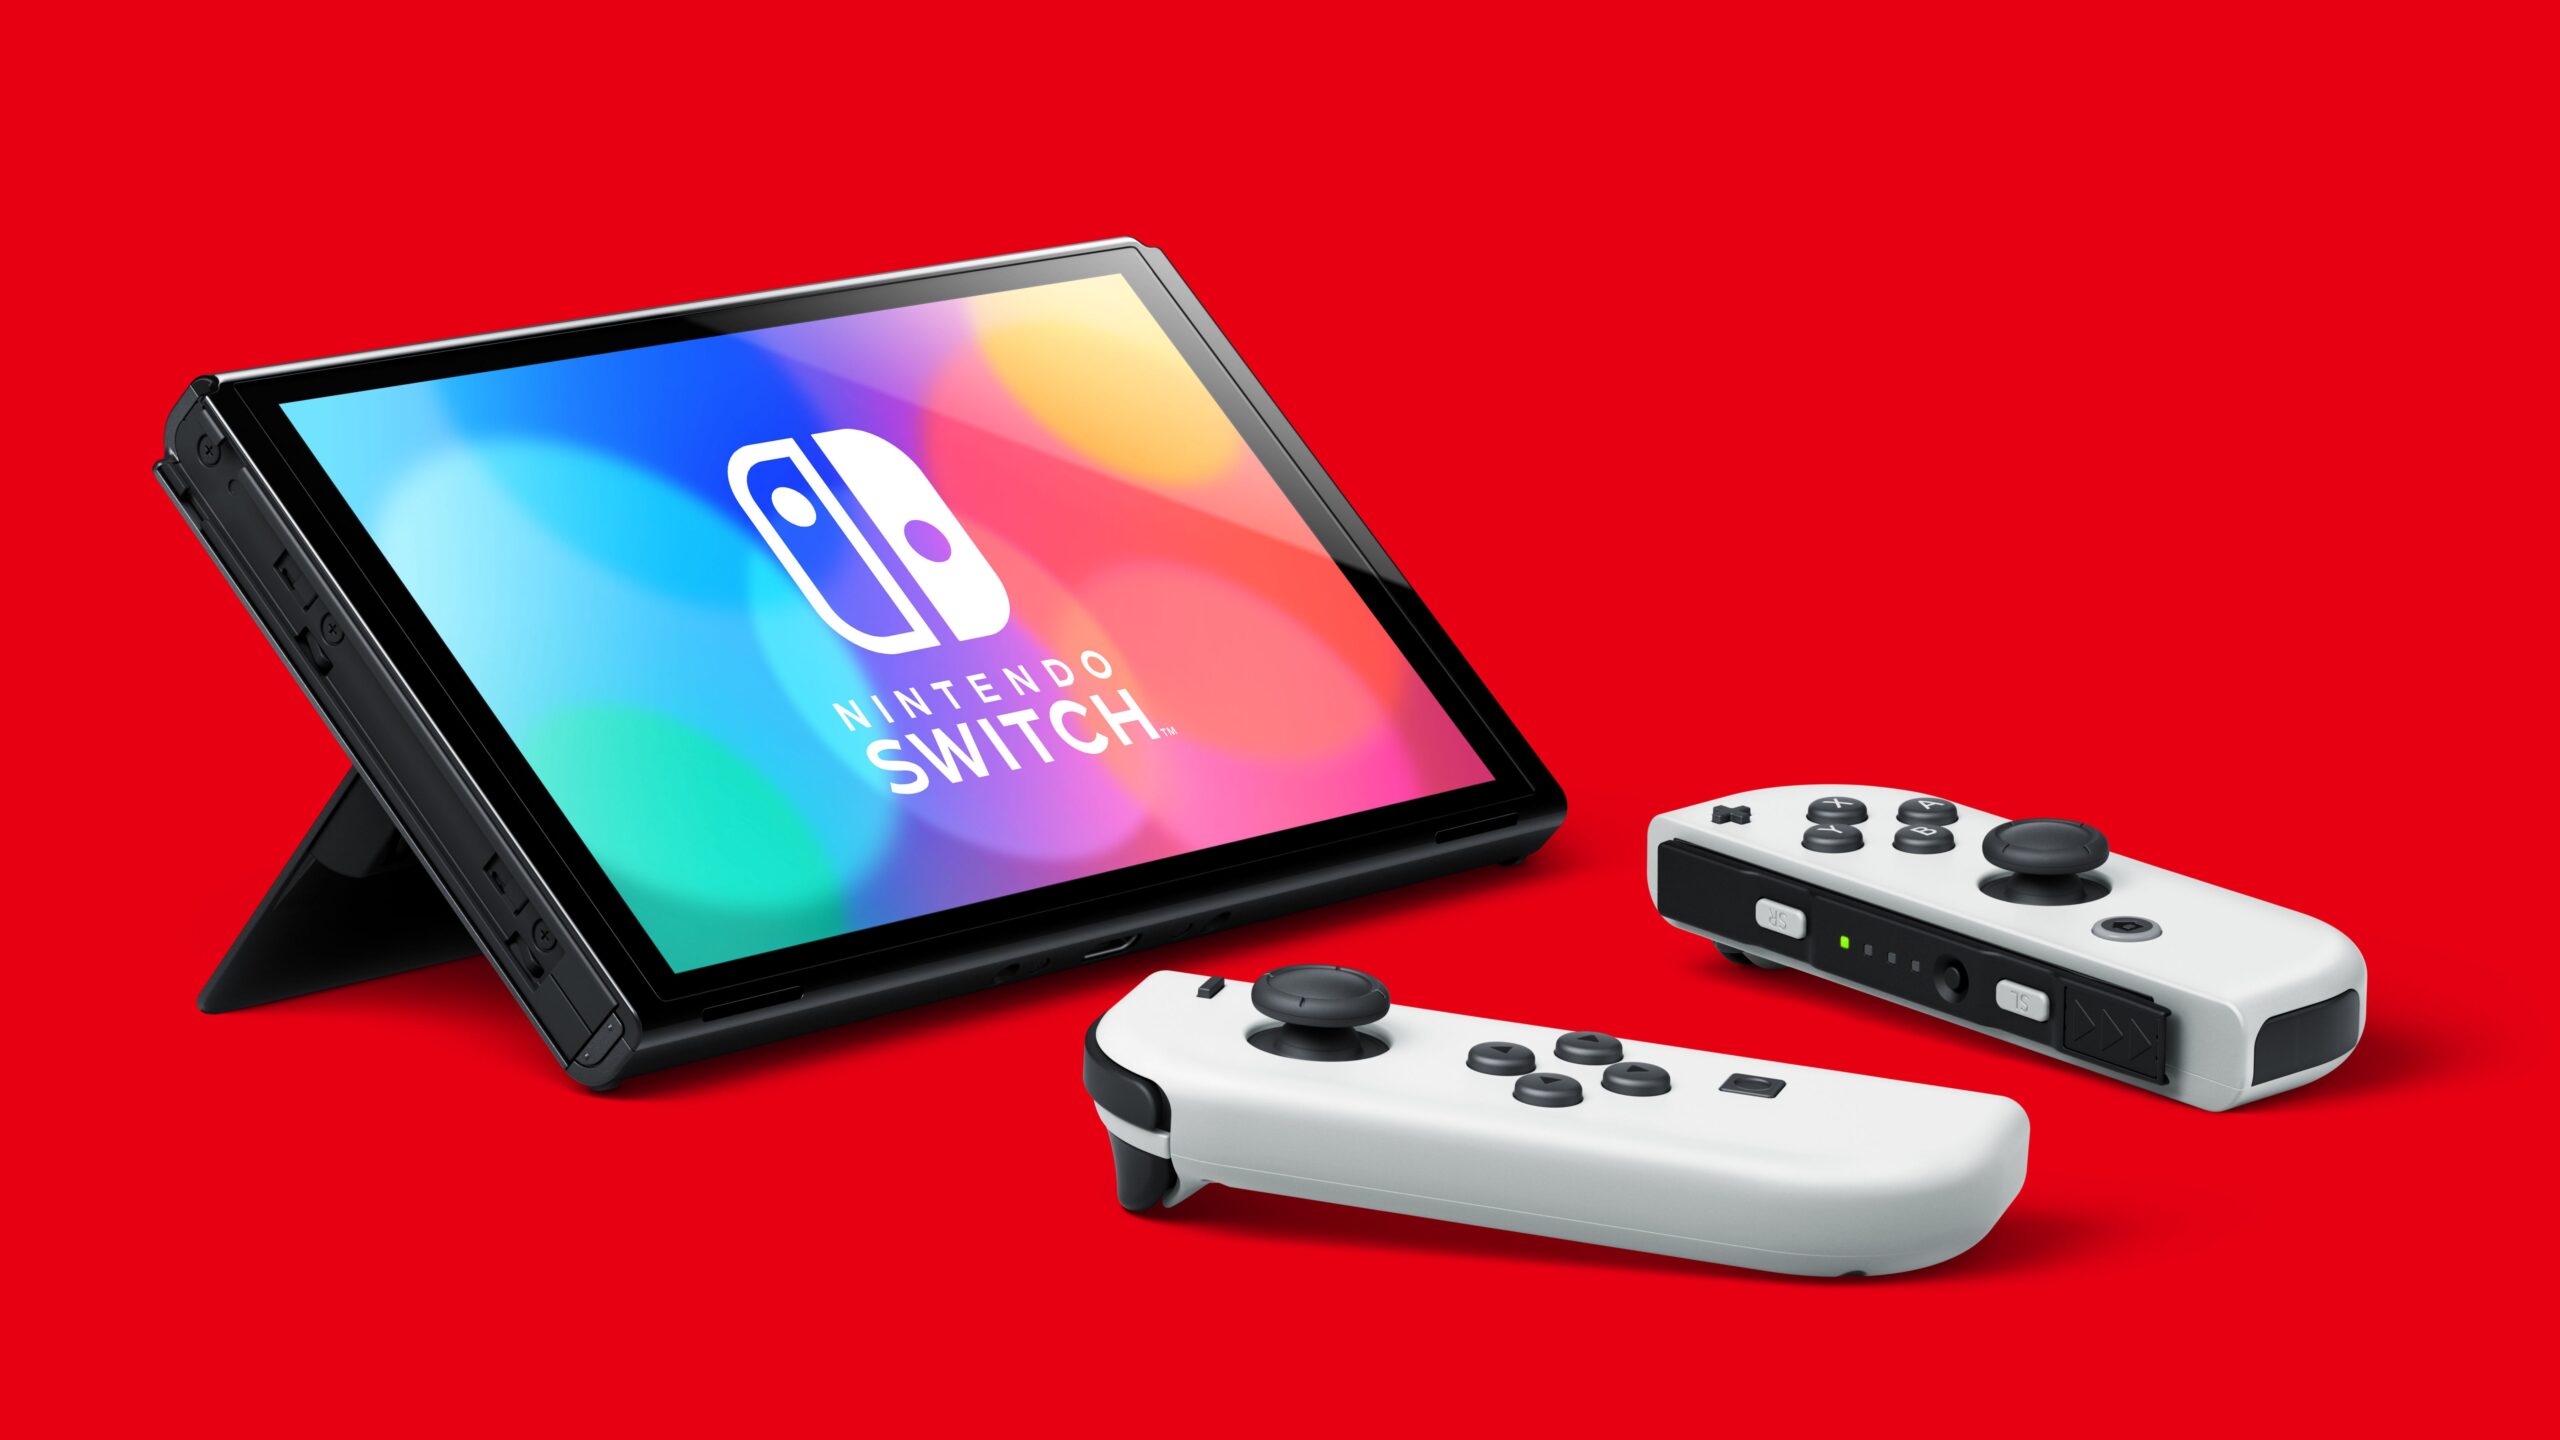 Nintendo Explain: Partner Showcase Introduced for This Week With 25 Minutes of Video games Coming to Switch